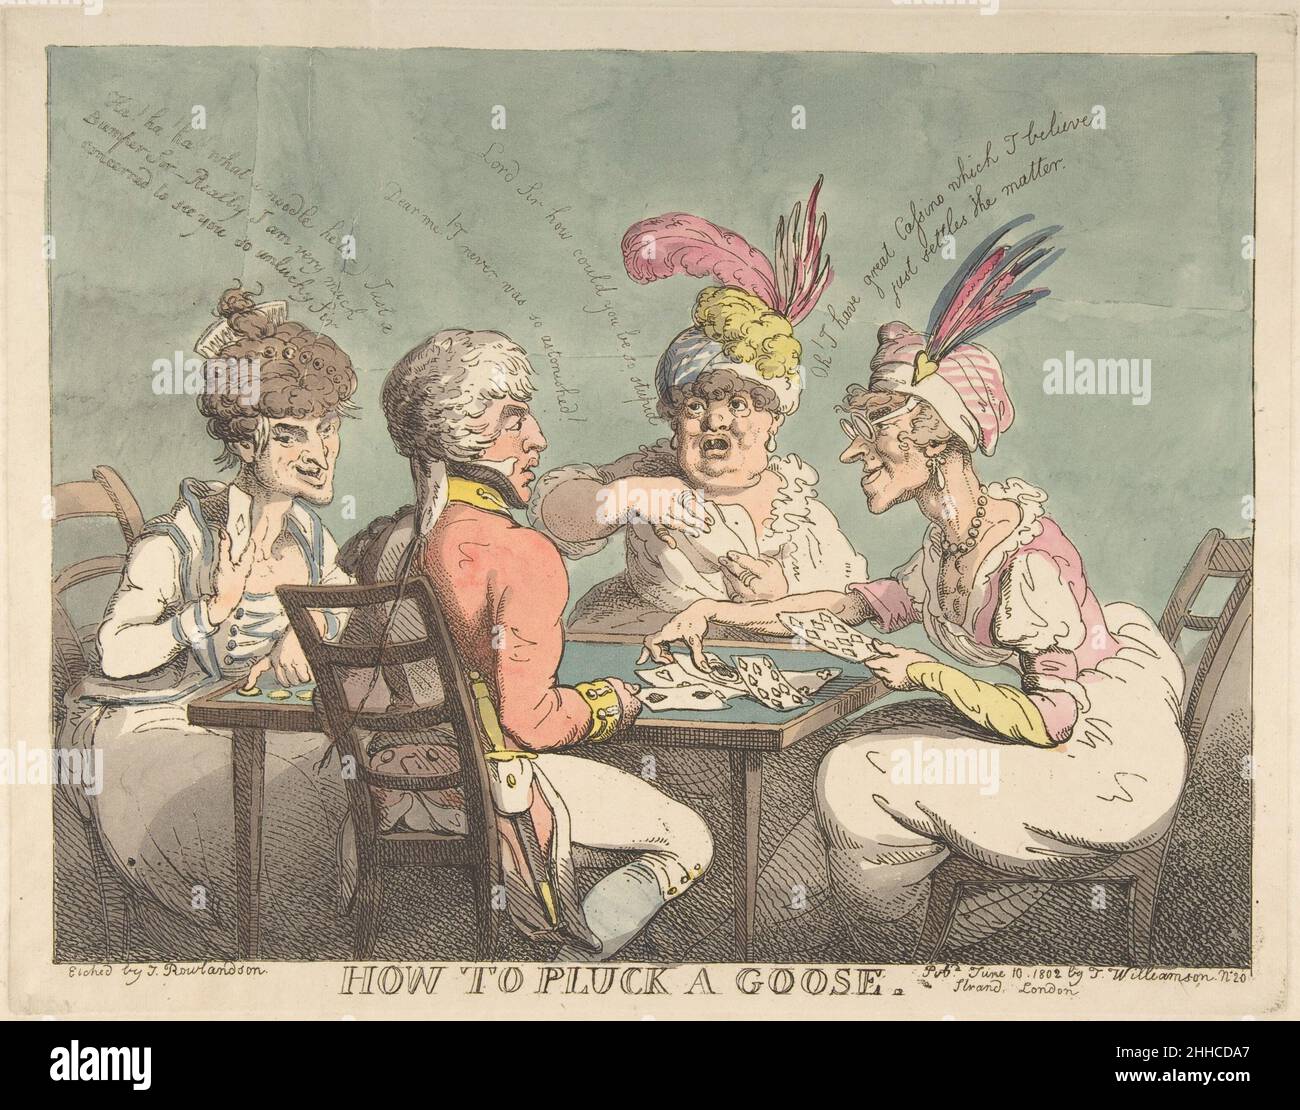 How to Pluck a Goose June 10, 1802 Thomas Rowlandson British A young officer playing the card game Cassino with three elderly expert females is the 'goose' being plucked in this print. The women wear fashionable high-waisted dresses and feathered turbans, and the partners, at left and right, make genteel exclamations over the officer’s bad luck. Having already collected 'a bumper,' or unopposed string of eight tricks, they are about to conclude the game as the woman in spectacles displays a 'great casino' (the ten of diamonds) and achieves the winning count of eleven. In Britain, decorum preve Stock Photo